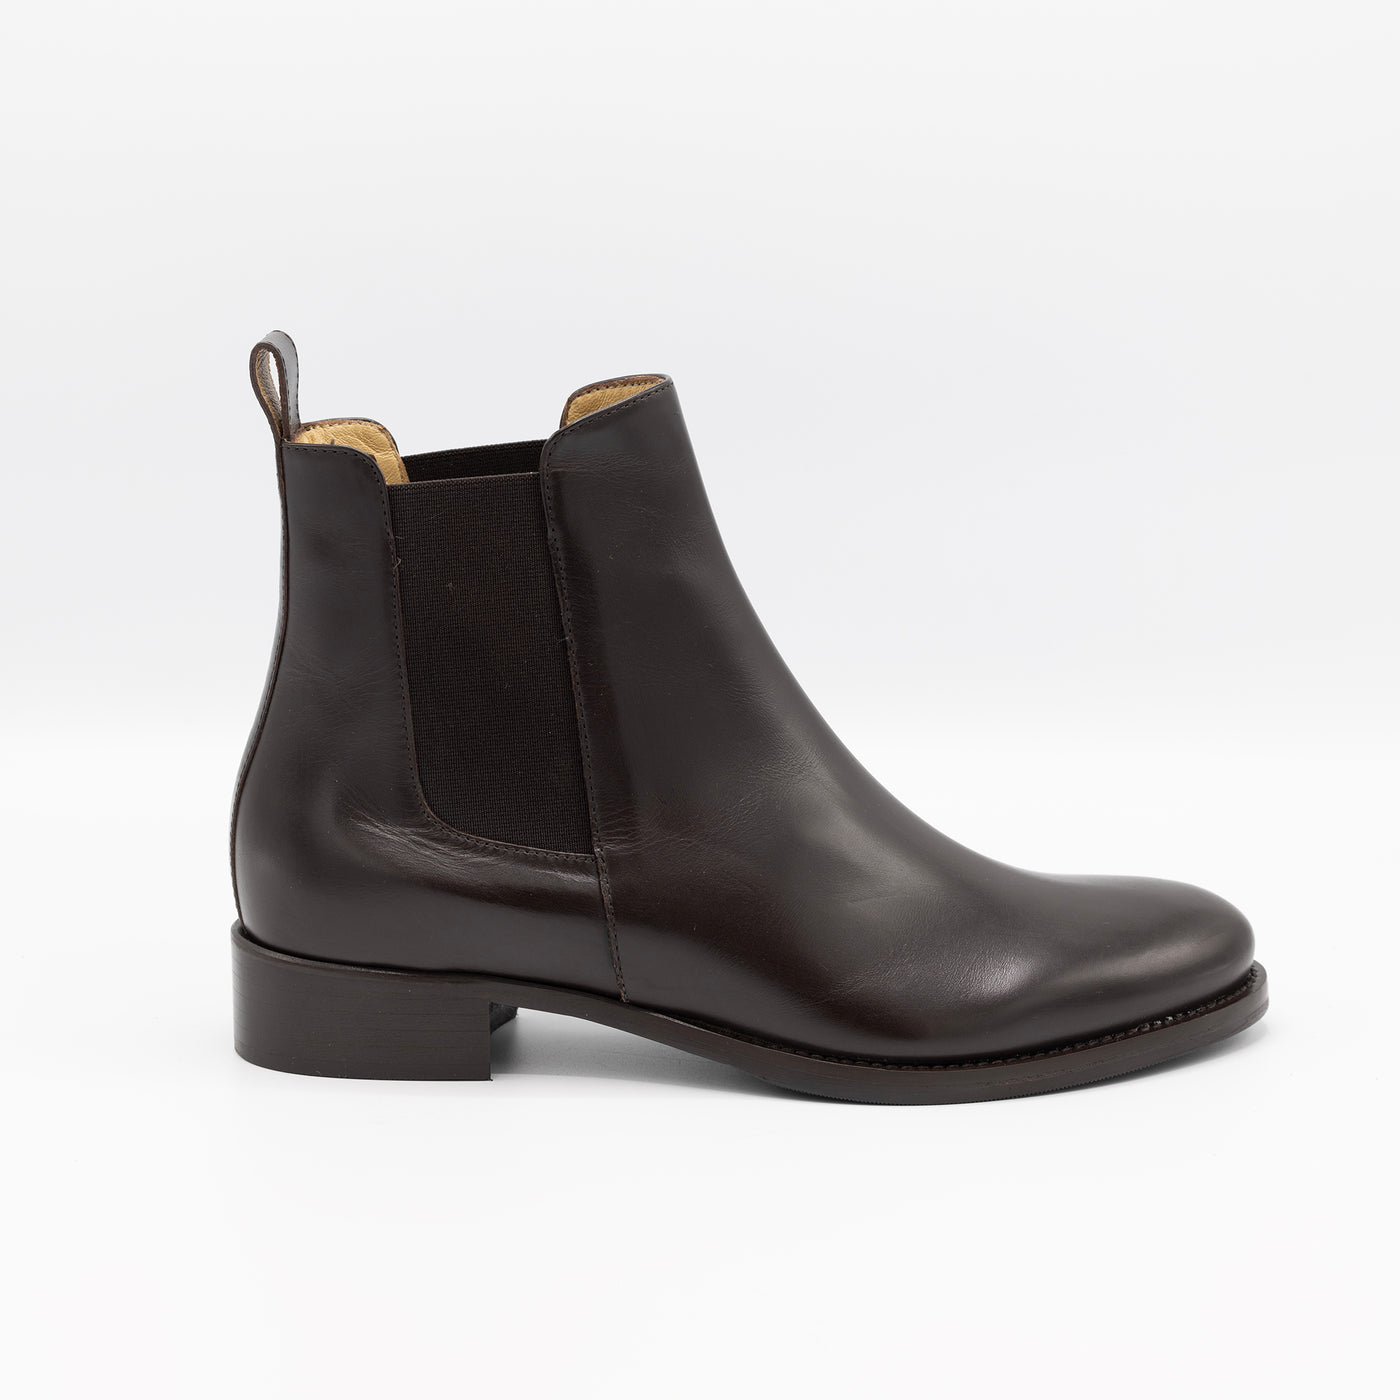 Women's brown leather chelsea boots